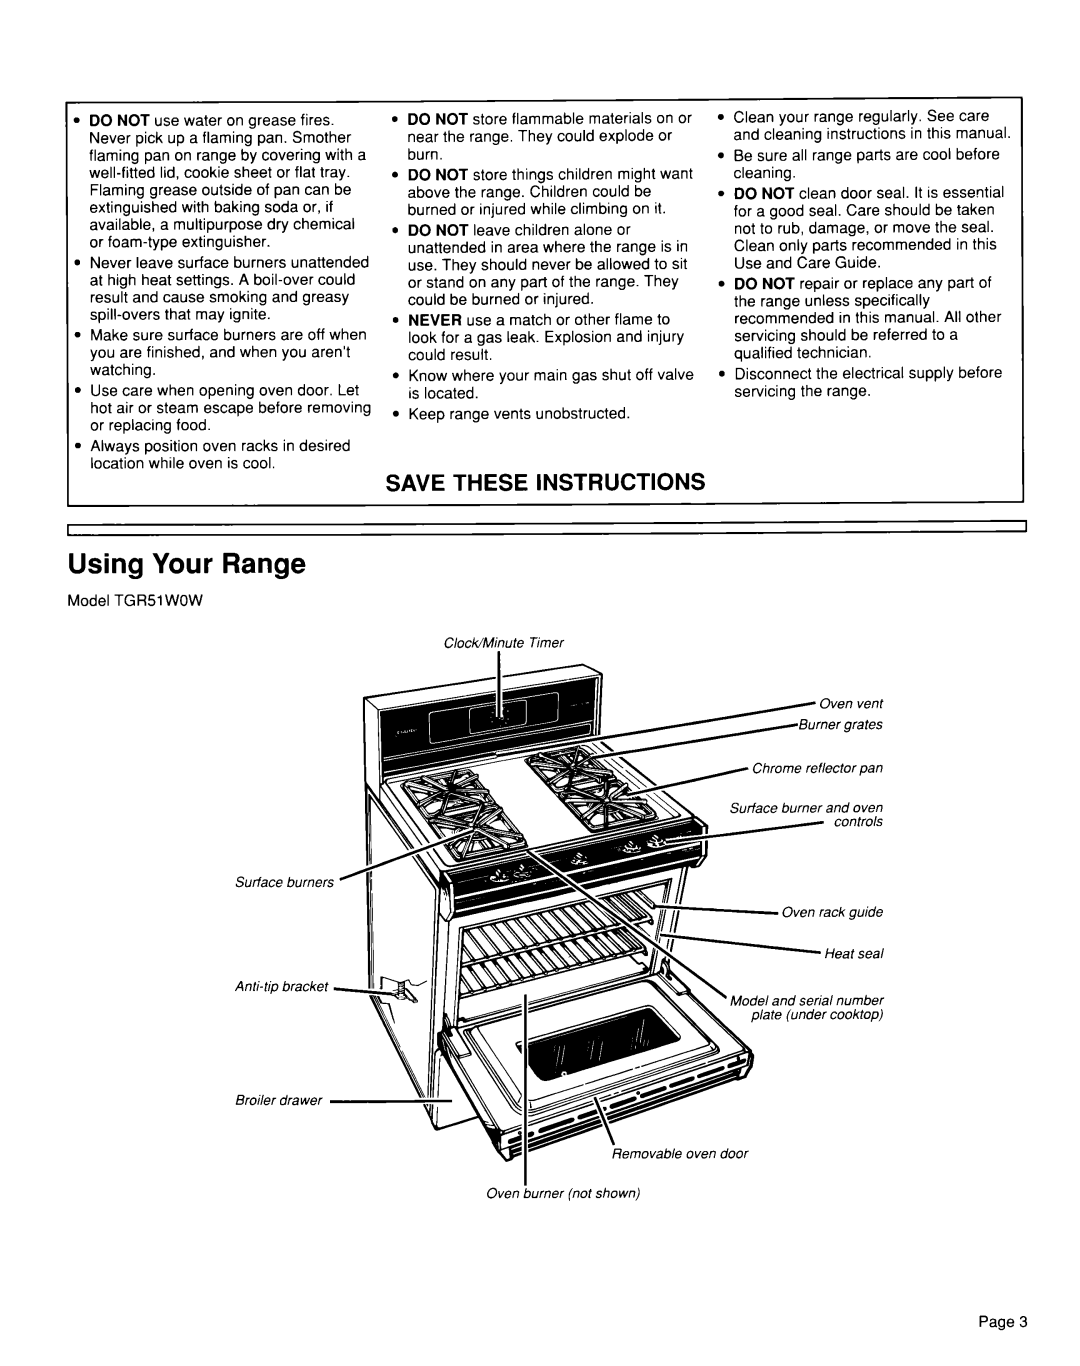 Whirlpool TGR51WOW installation instructions Using Your Range, Save These Instructions, V-Ii 